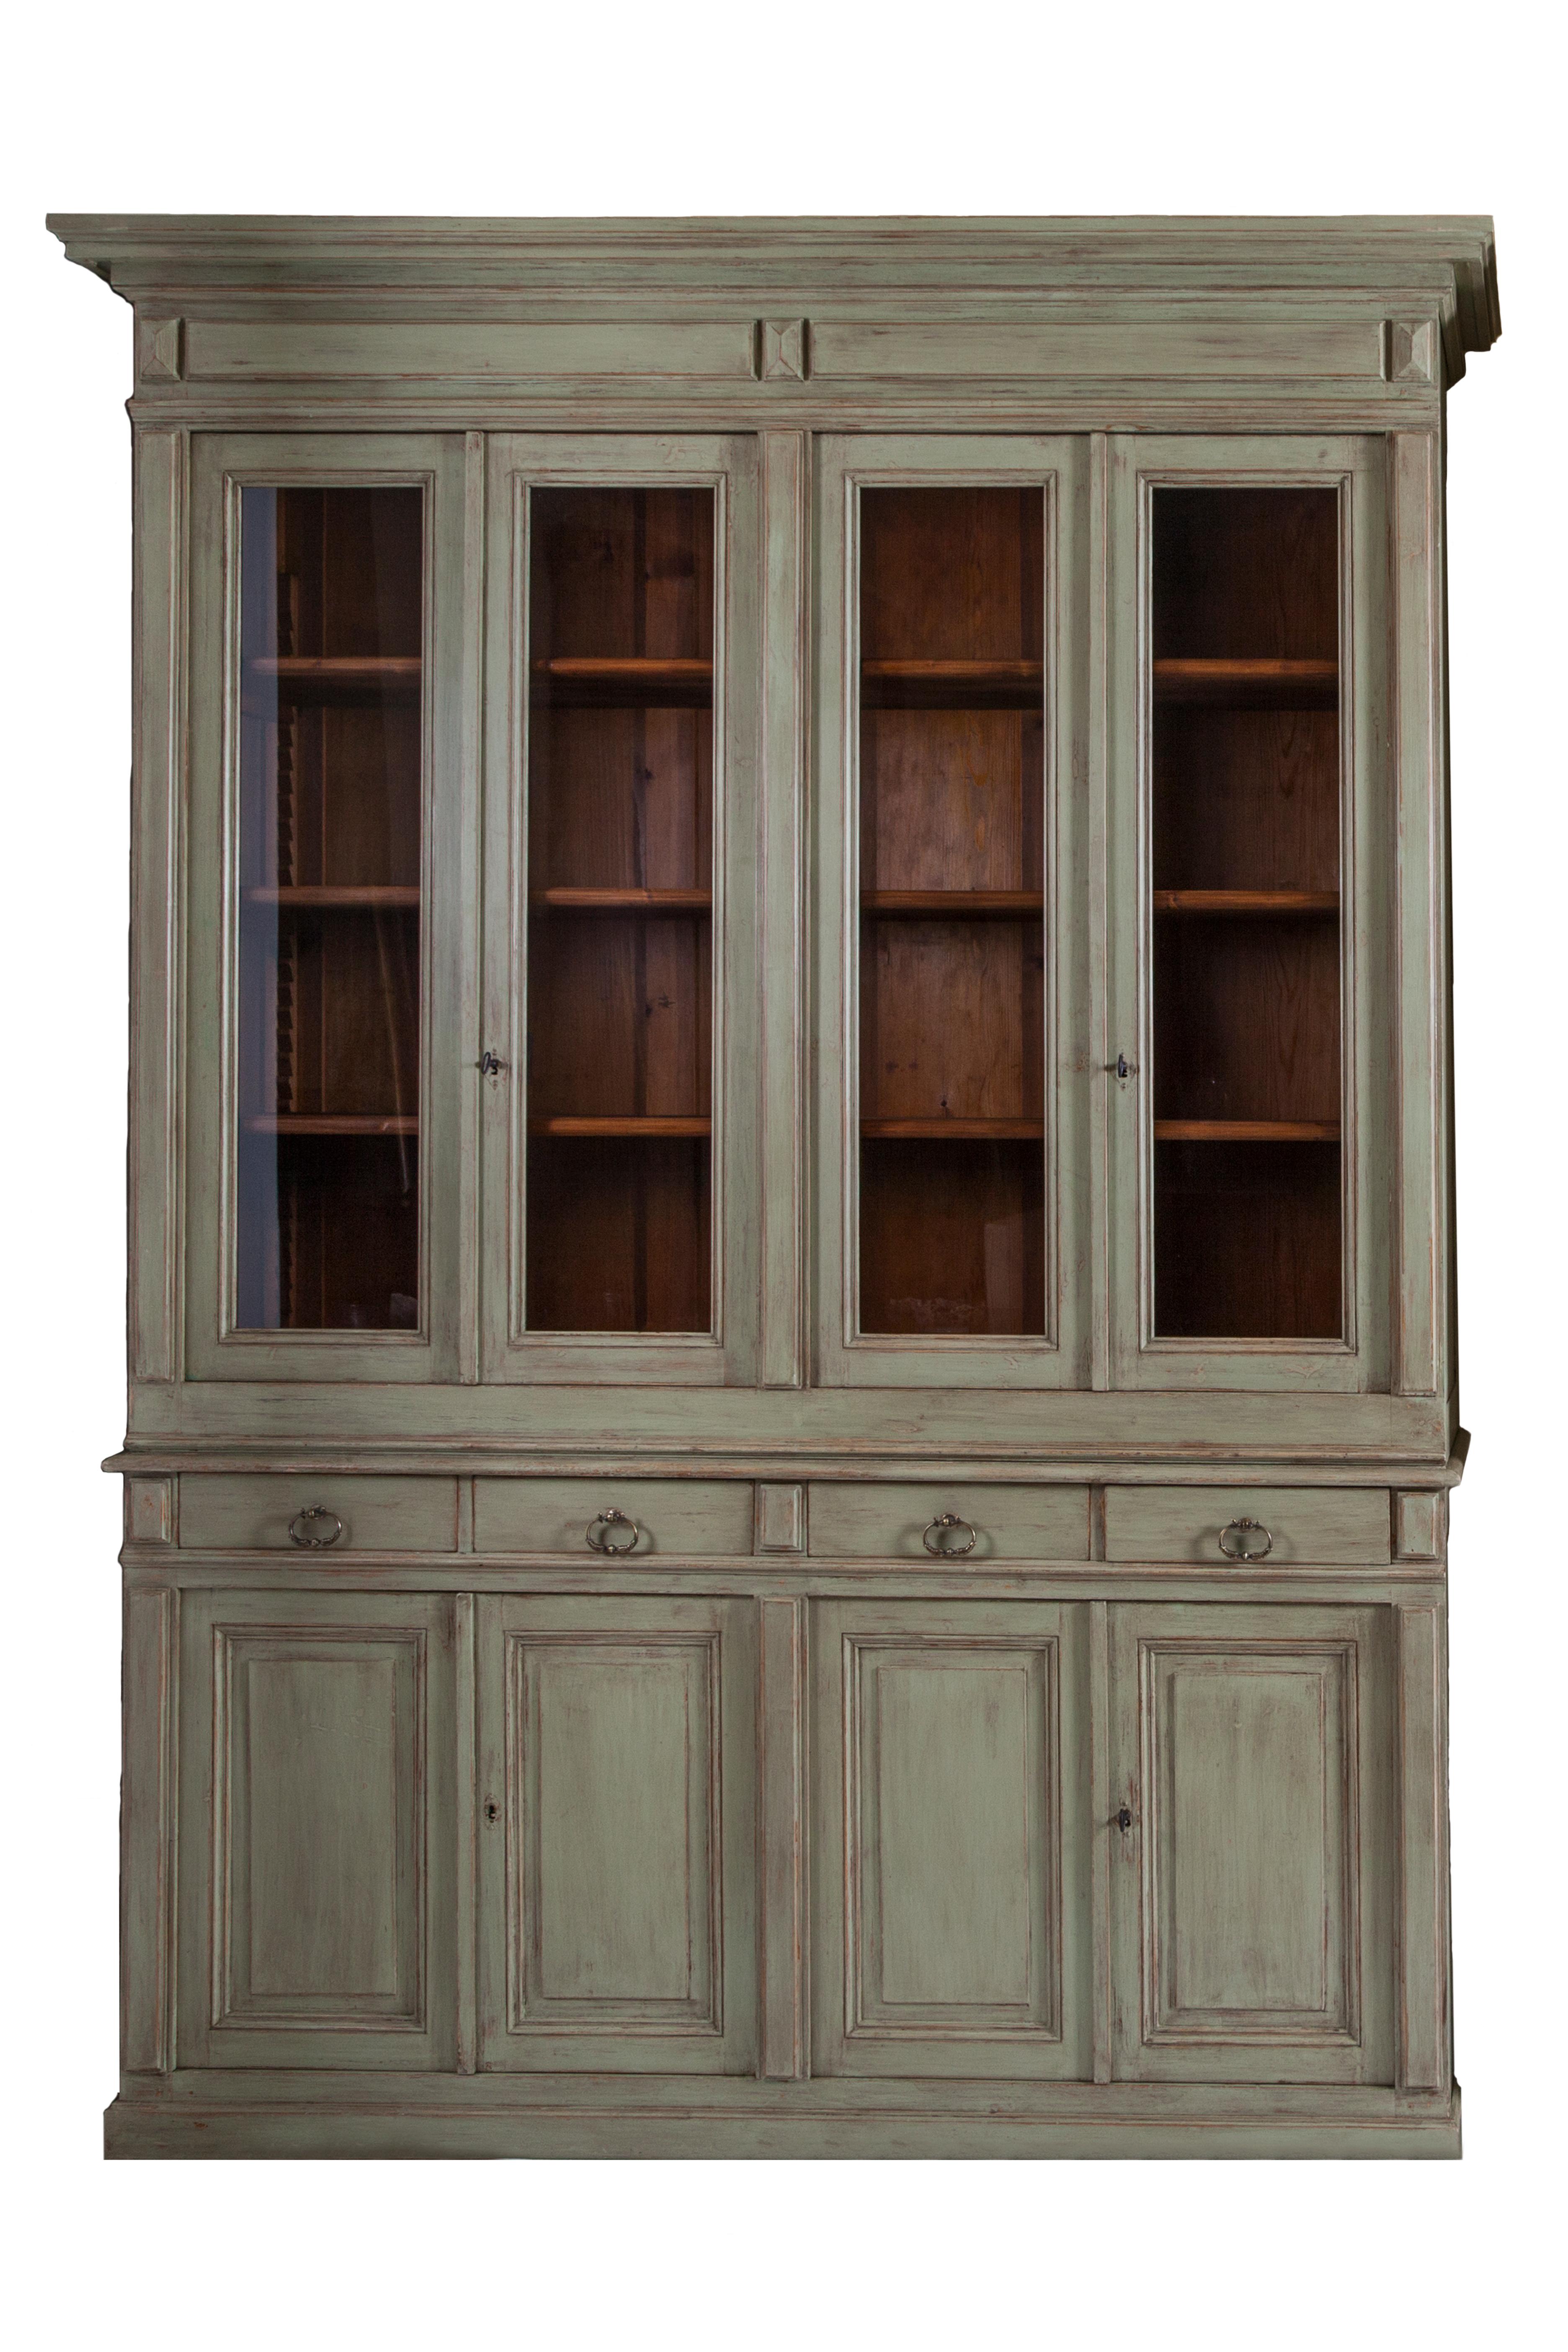 19th century French neoclassical lacquered pharmacy bookcases. Made in pinewood.
Restored with water painting and natural beeswax.

Measures: cm 190 x 45 x 255 H 